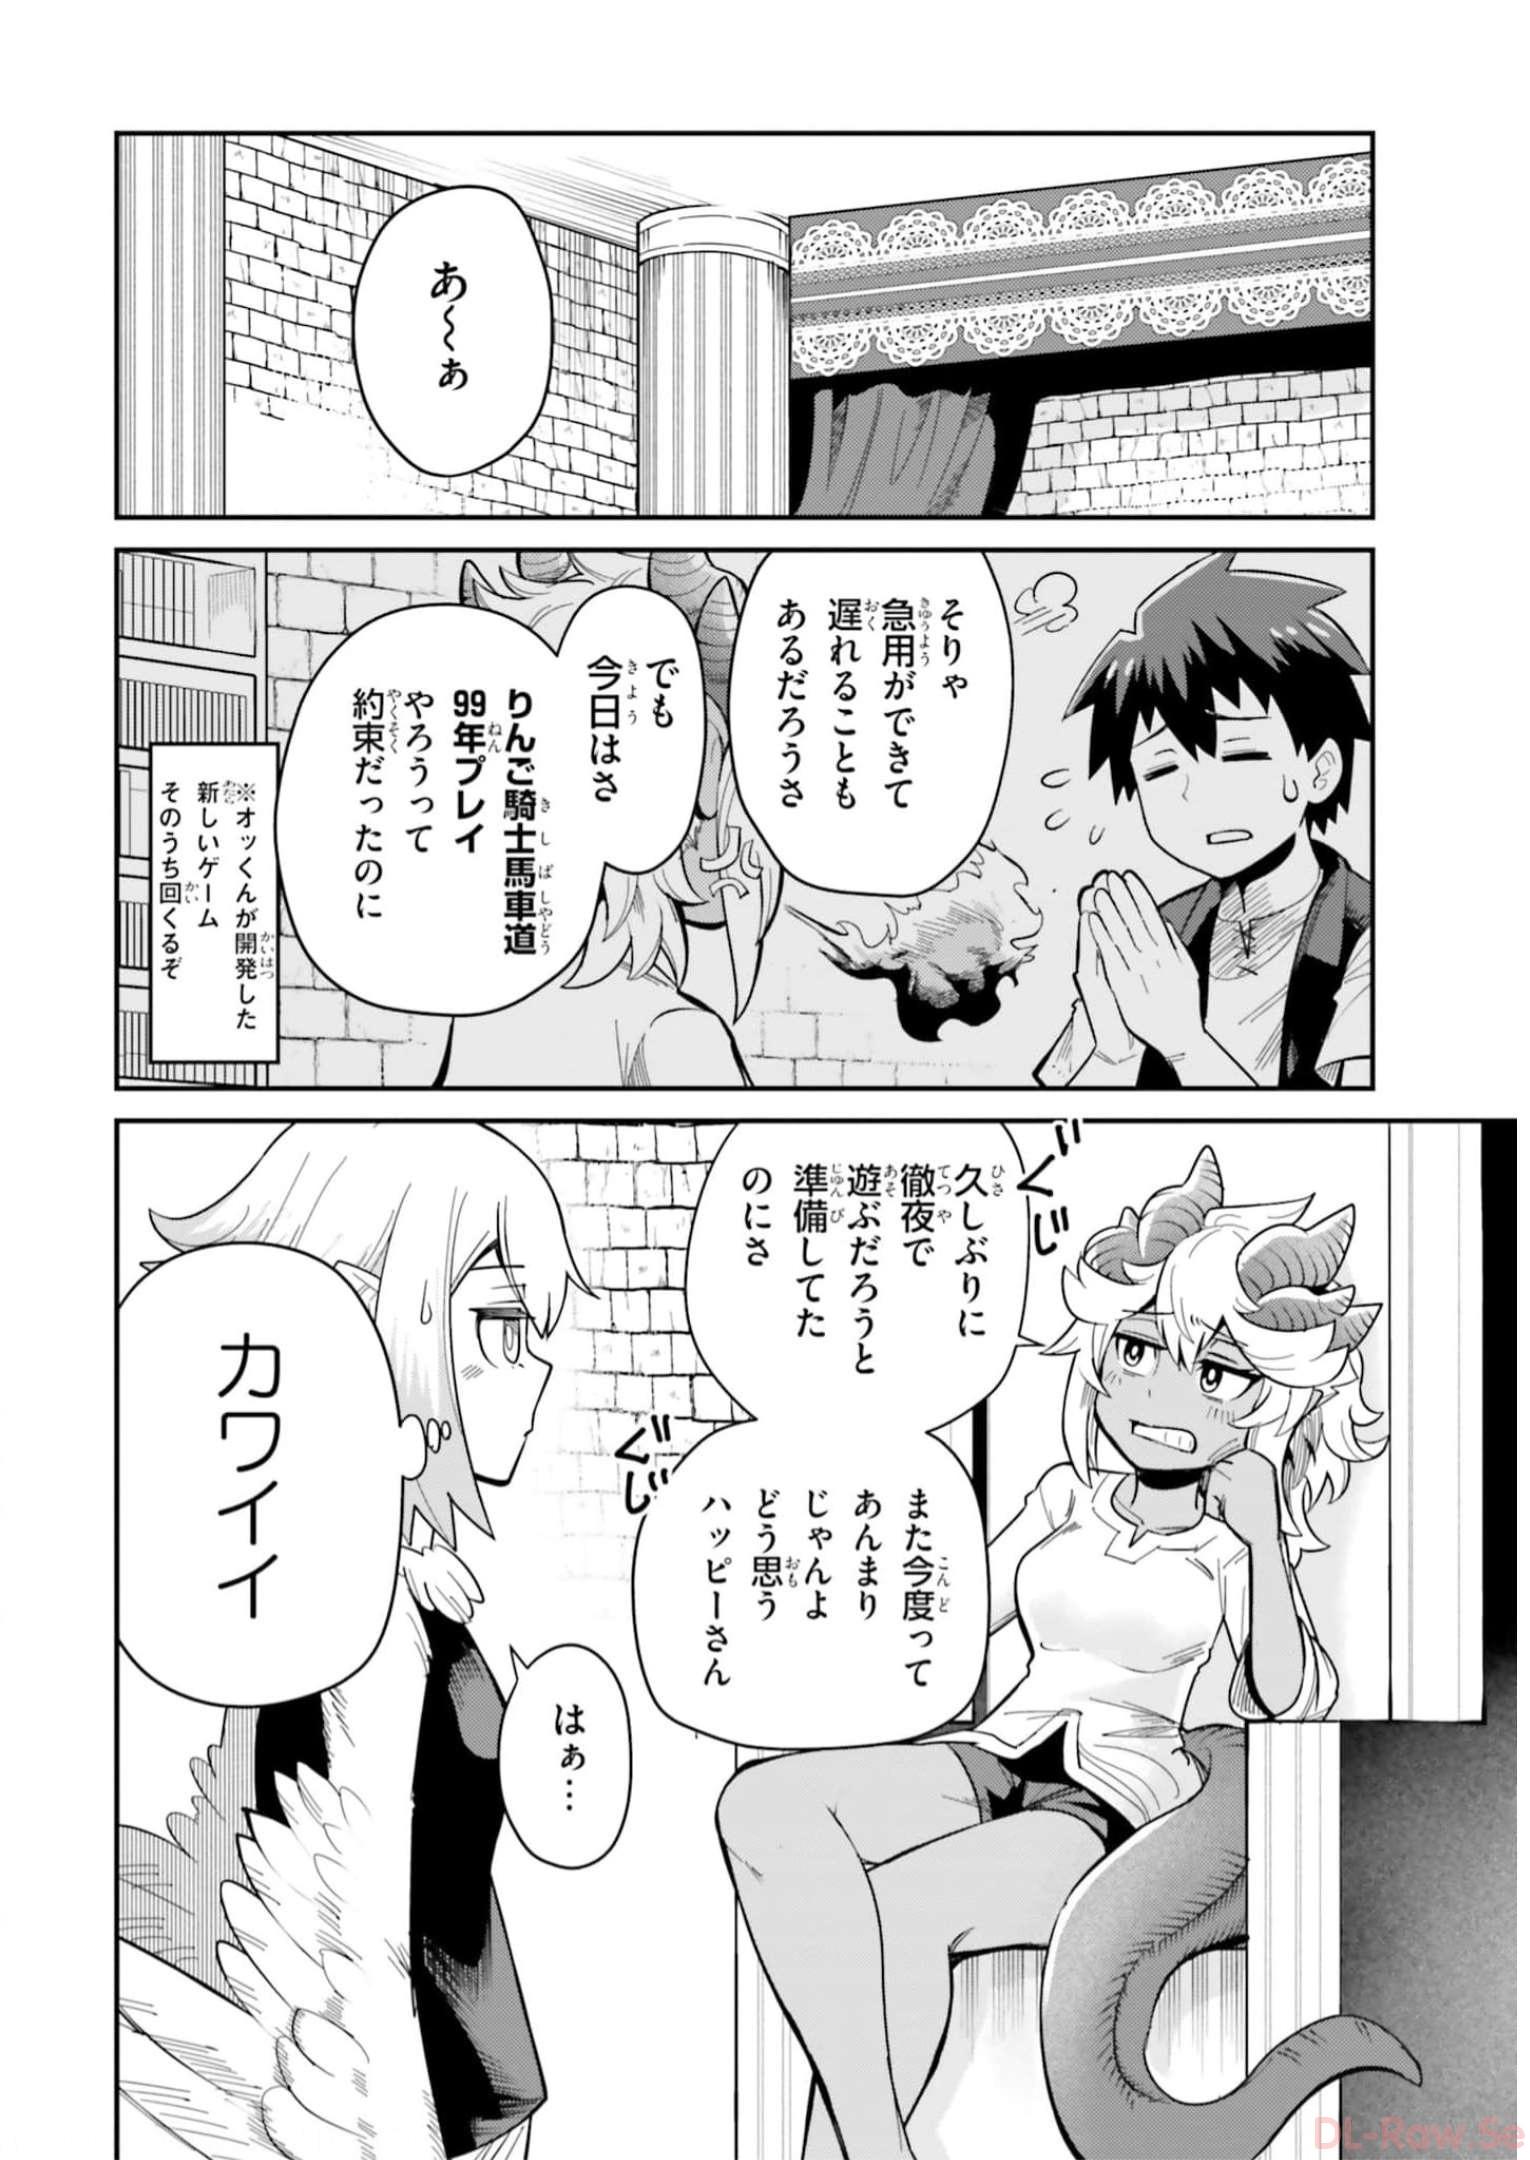 Dungeon Friends Forever Dungeon's Childhood Friend ダンジョンの幼なじみ 第26話 - Page 2